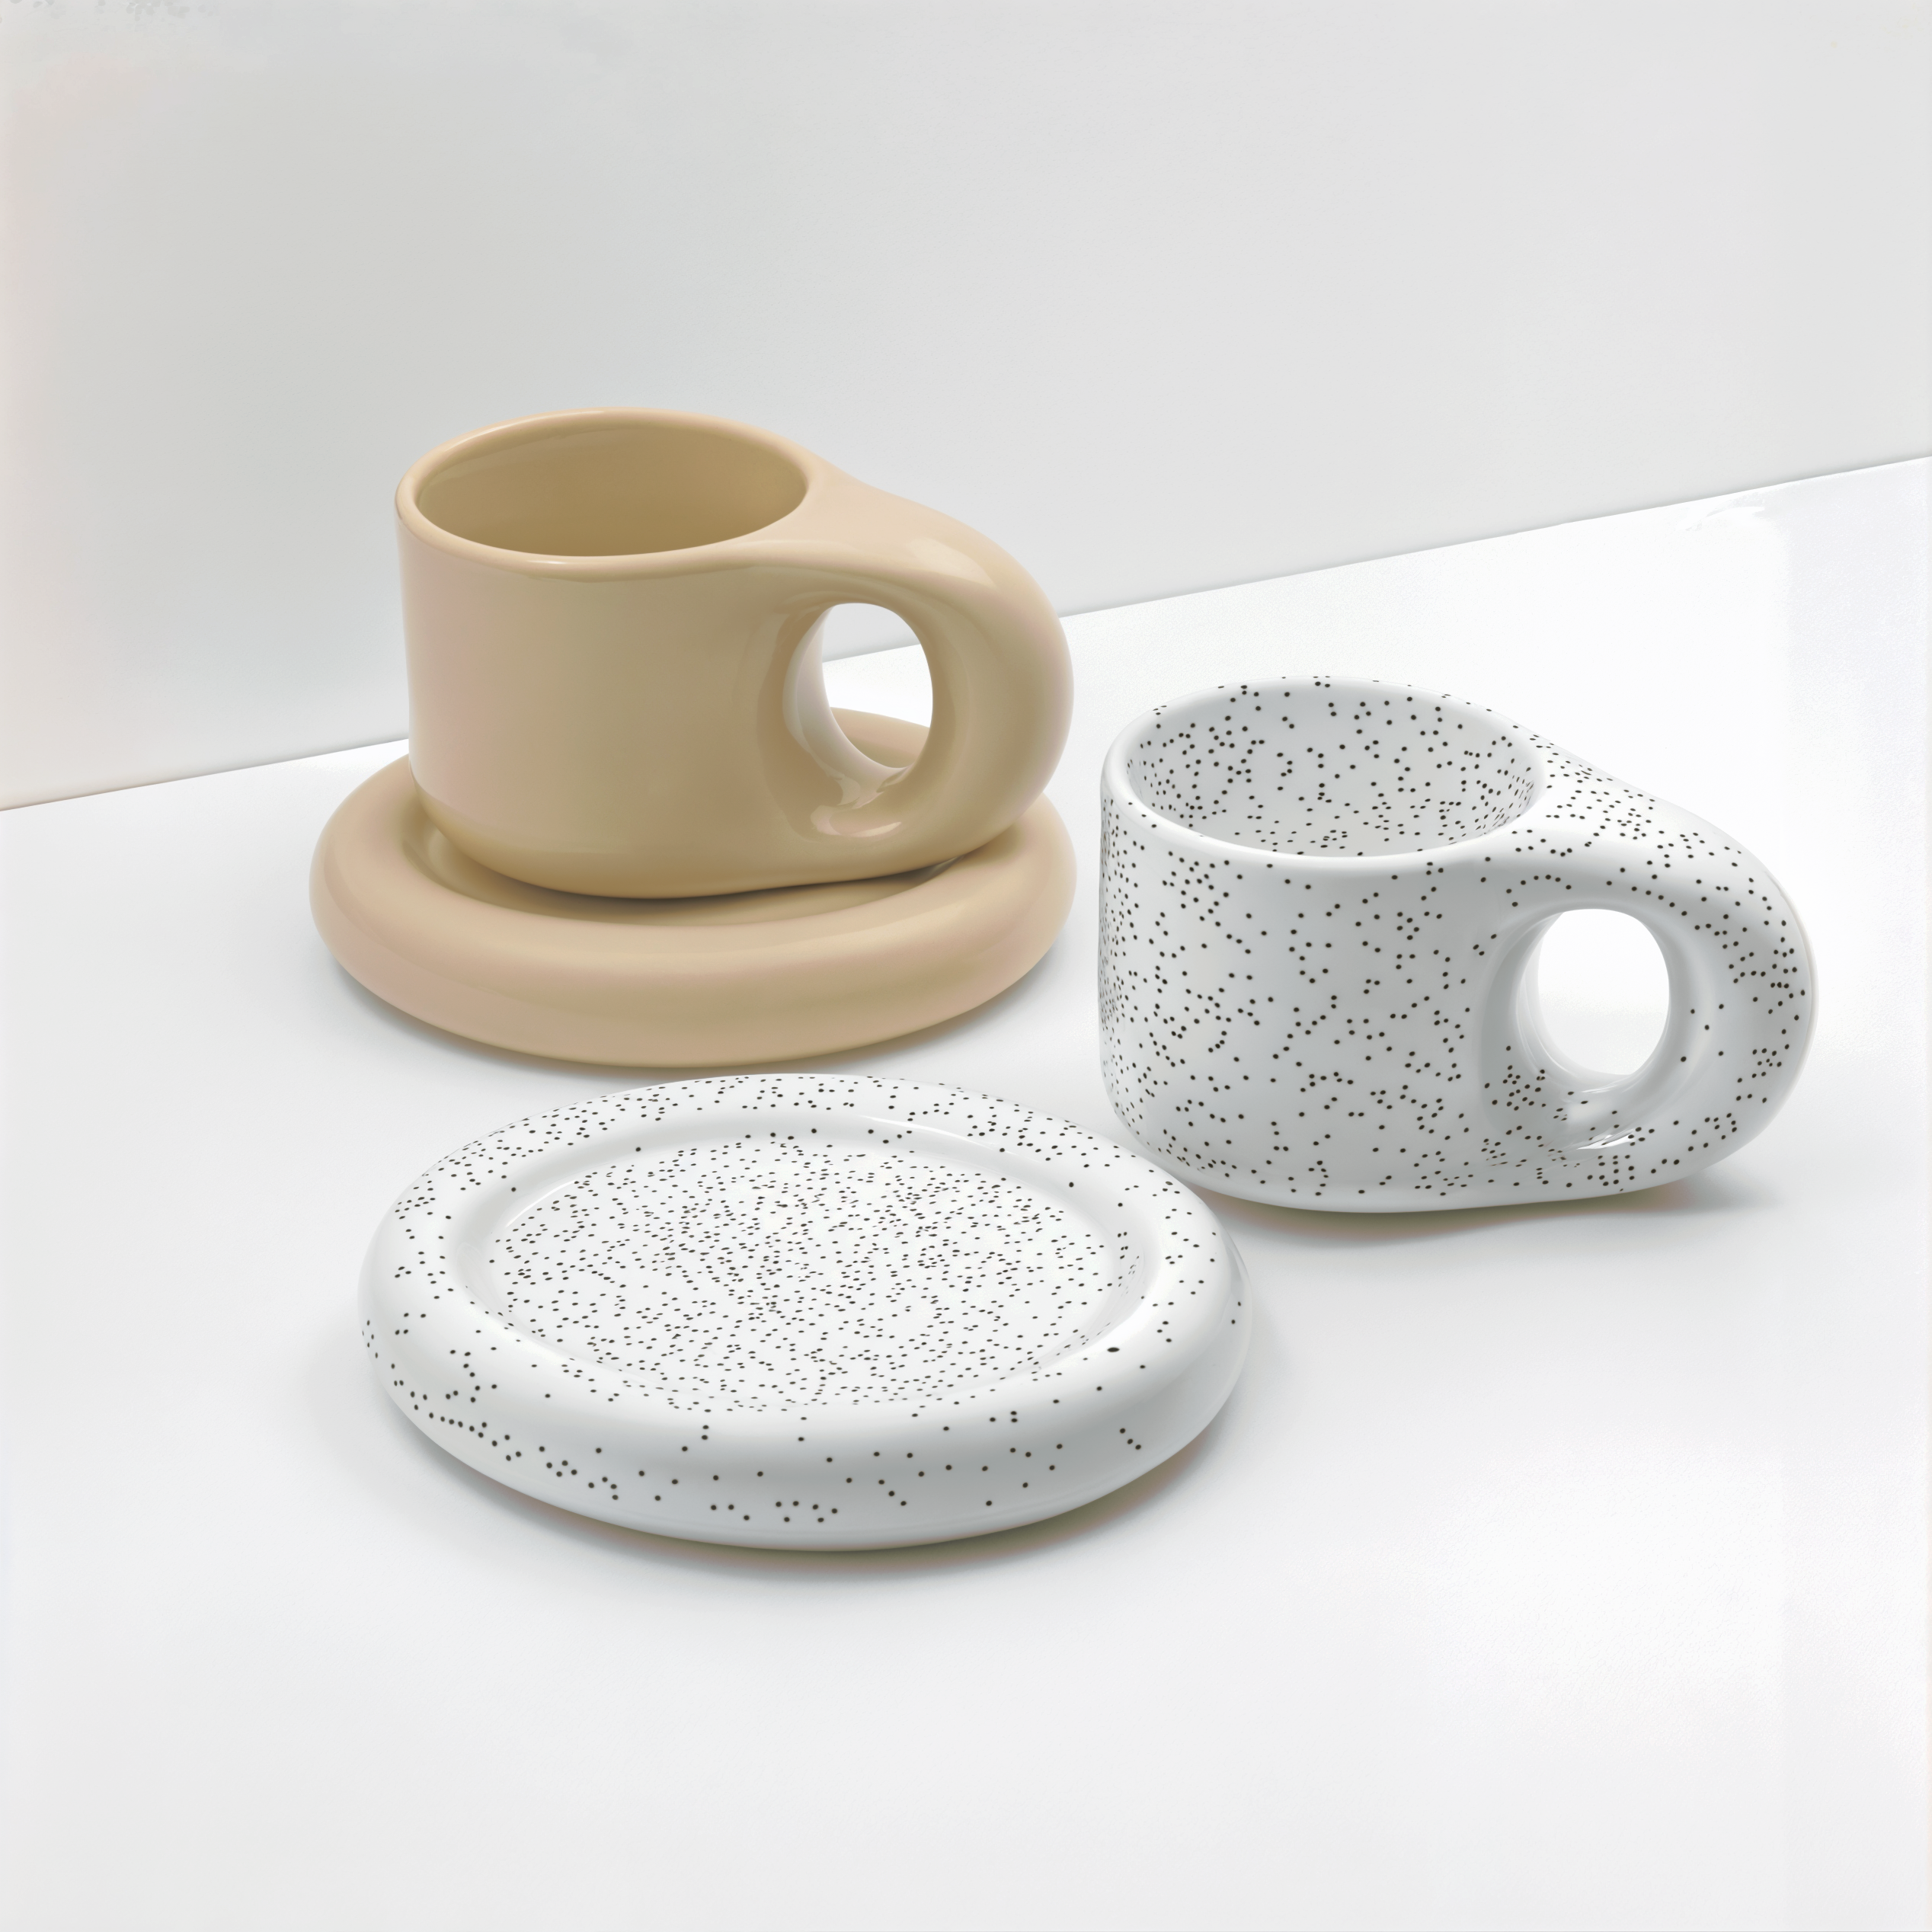 The Minimal Cup and Dish Set